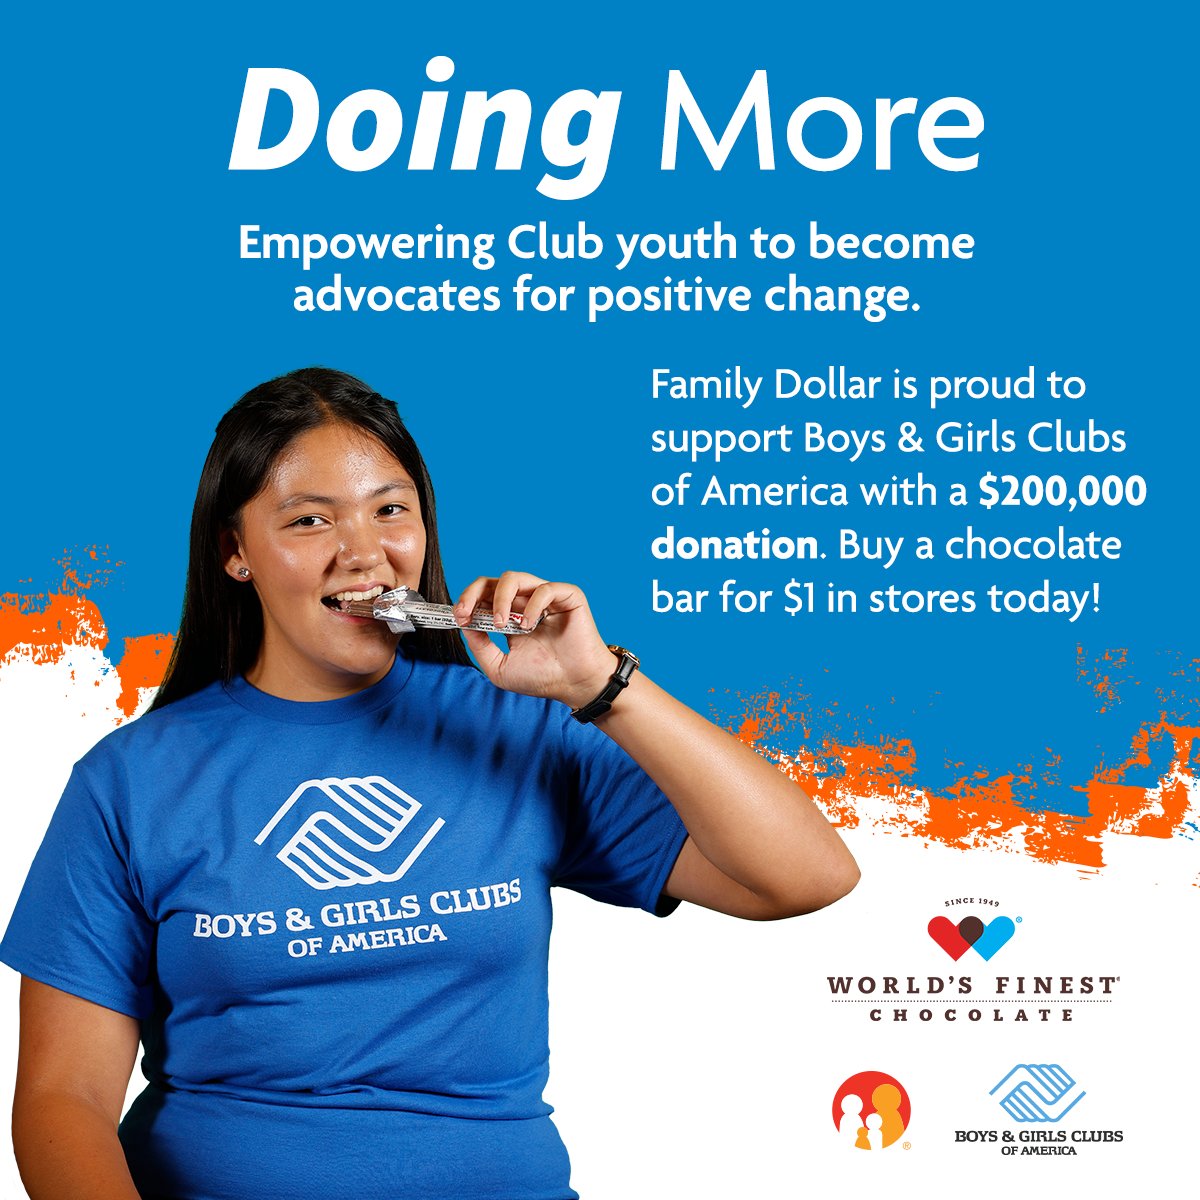 Family Dollar is proud to support @bgca_clubs youth in advocating for positive change in their communities. Learn more and buy a World’s Finest Chocolate® bar in stores to show your support: FD.social/rN1z50QO0pv